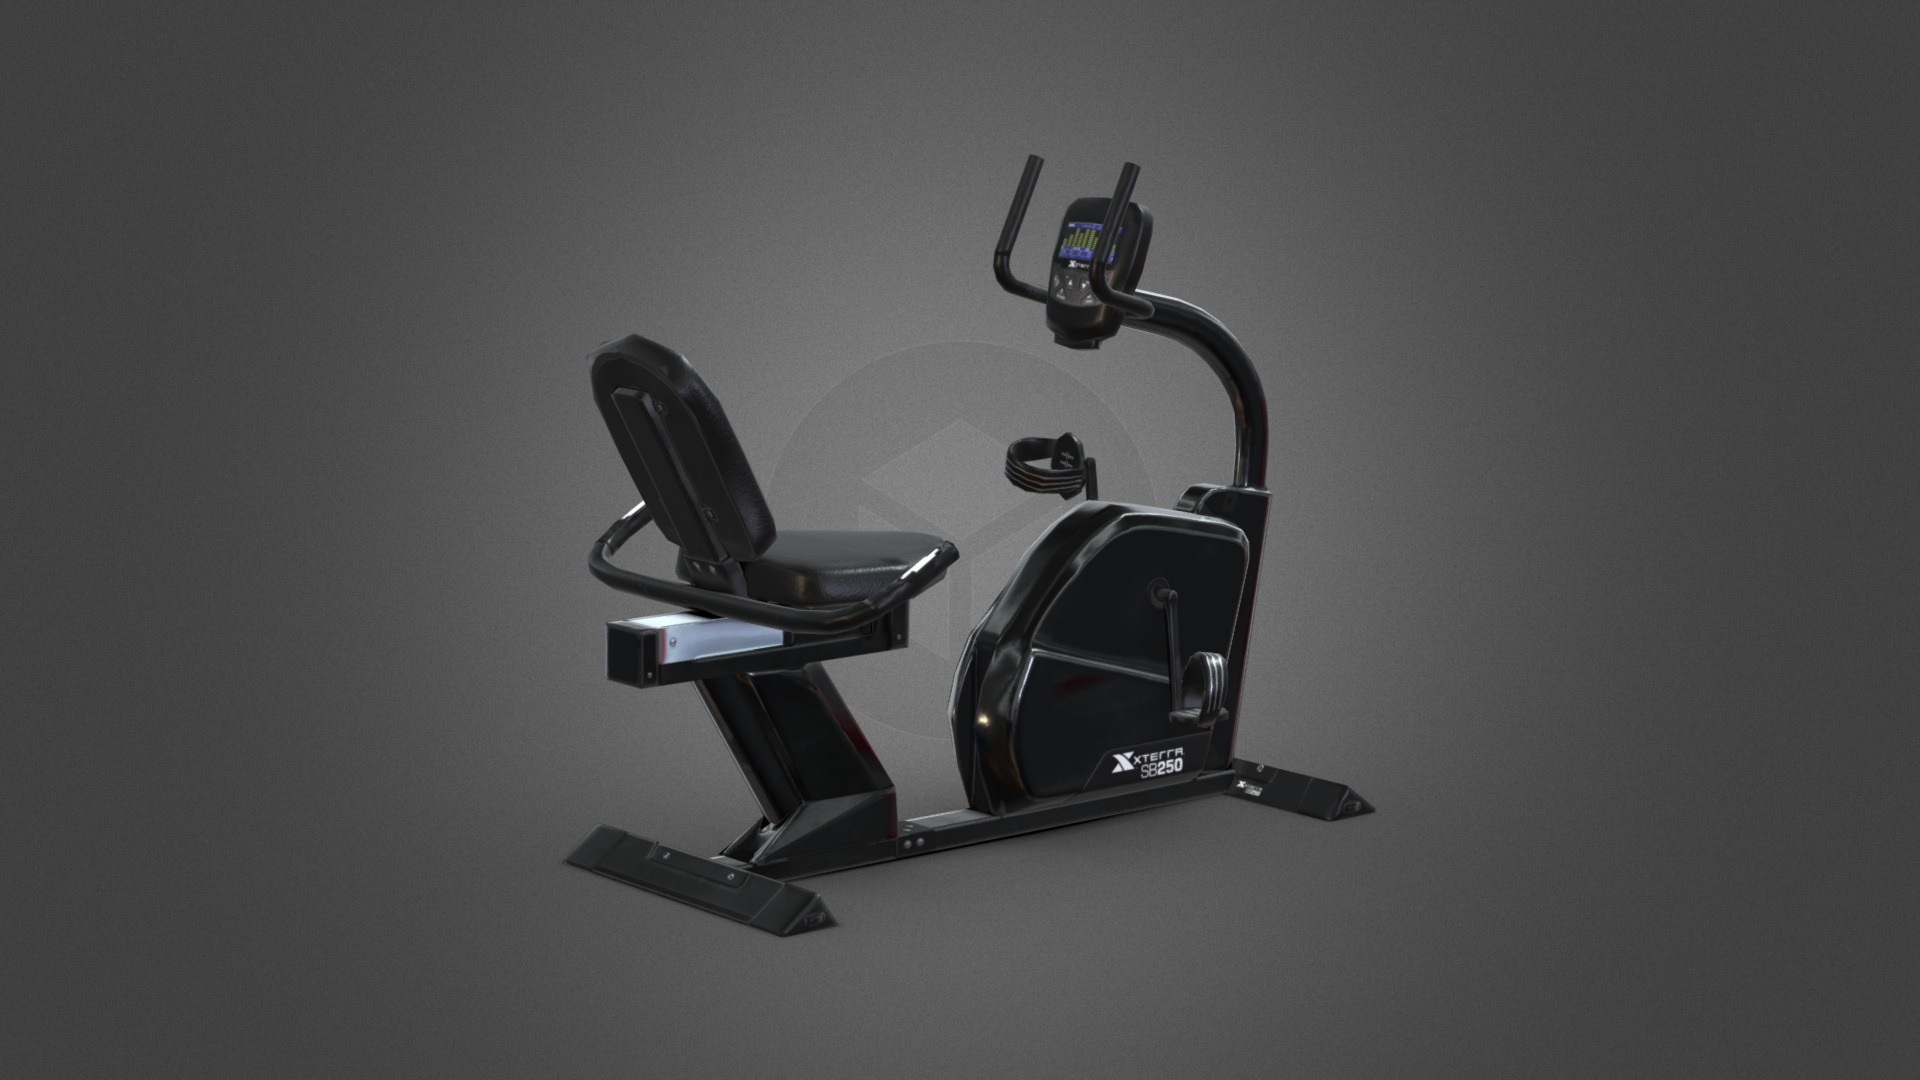 3D model Fitness Bike XTERRA  SB250 Recumbent - This is a 3D model of the Fitness Bike XTERRA  SB250 Recumbent. The 3D model is about a black and silver car.